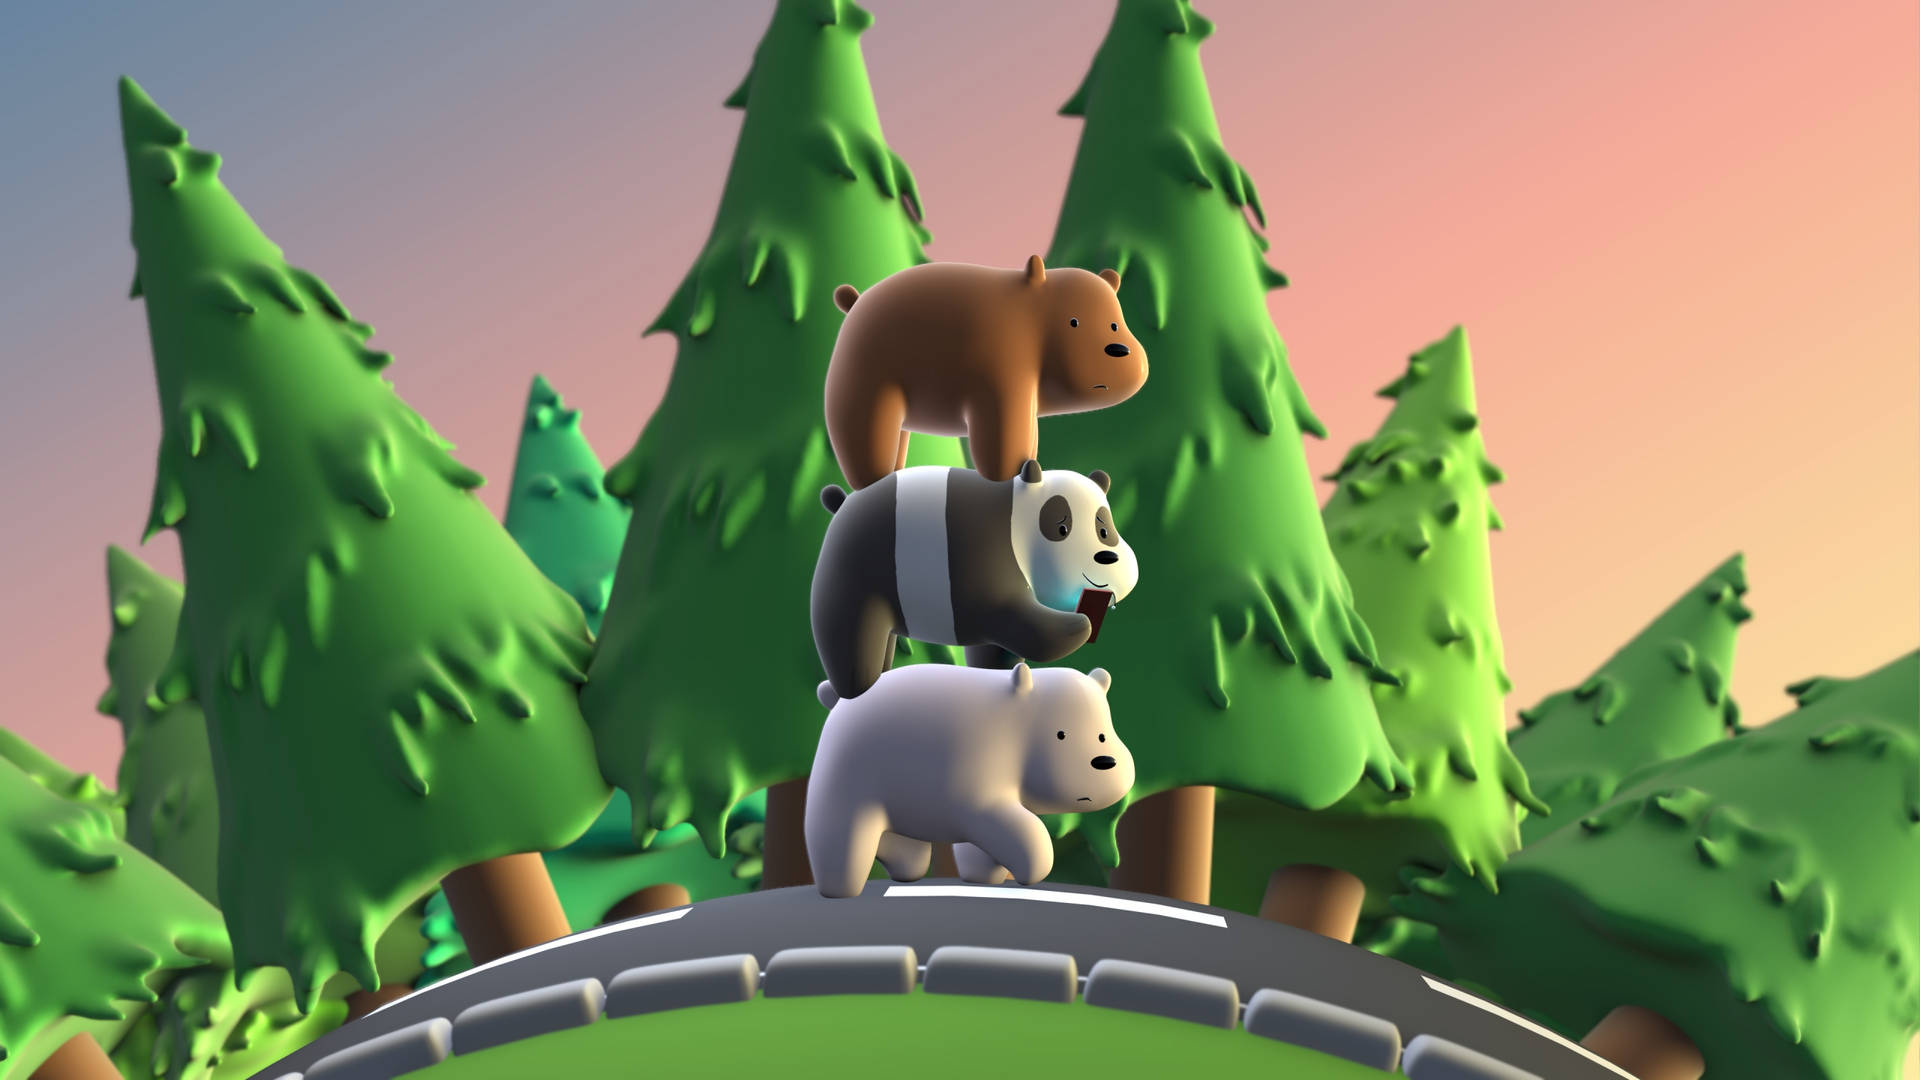 Top 999+ We Bare Bears Wallpaper Full HD, 4K✅Free to Use